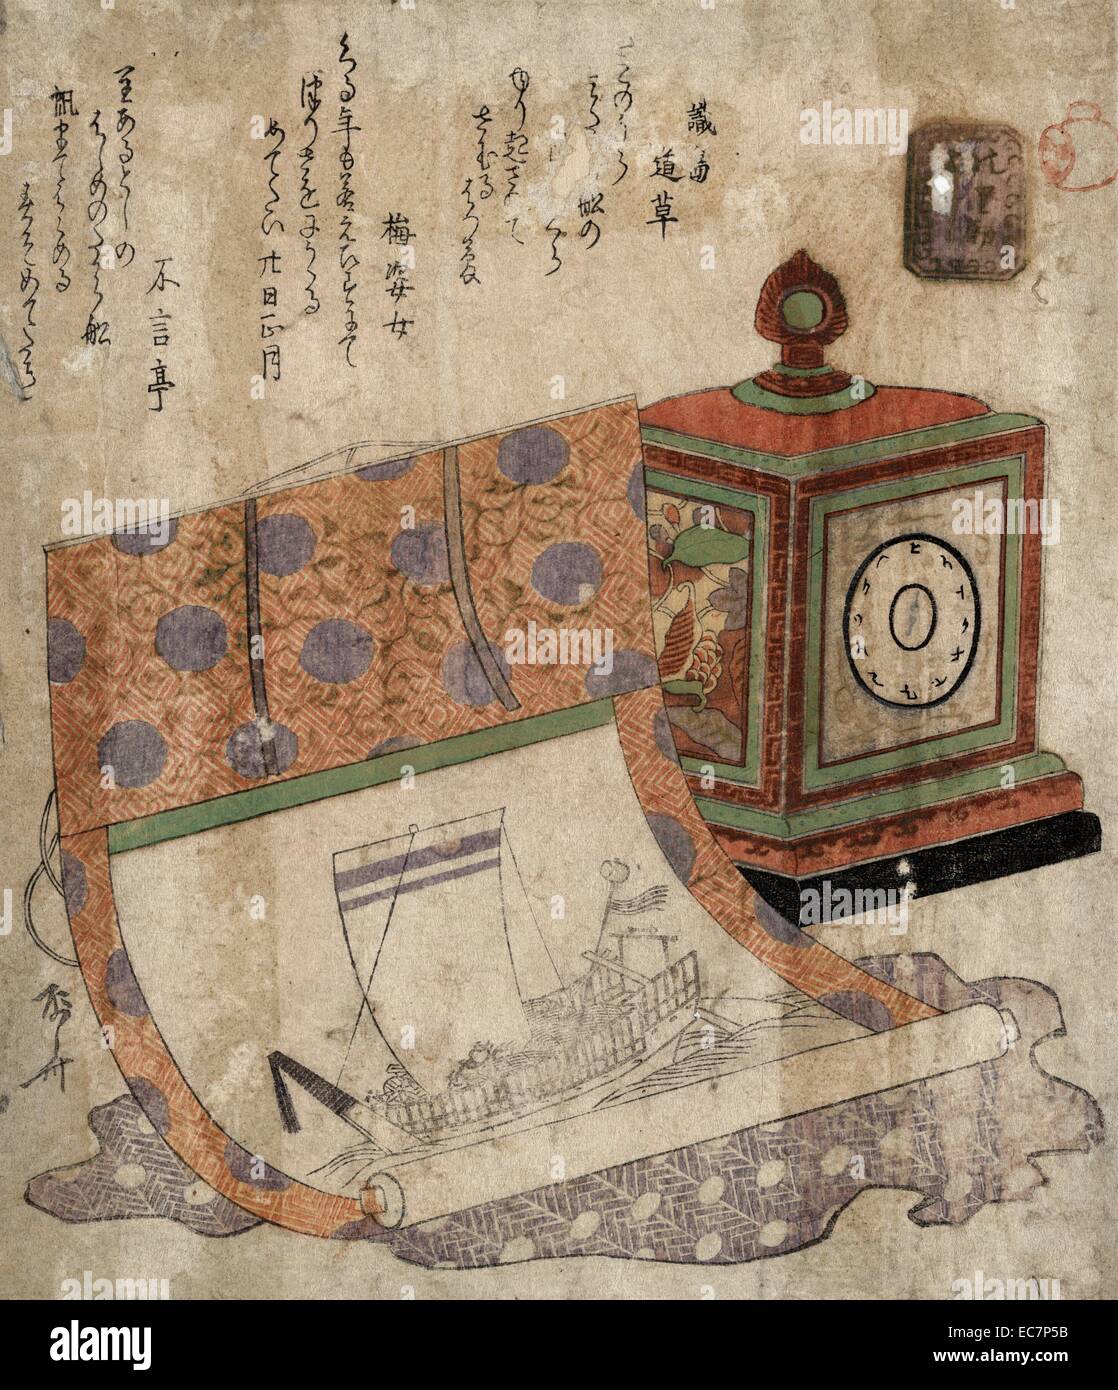 Tokei to takarabune no kakejiku - Painting of a ship of treasures and a western clock. Print shows a painting of a ship on a scroll or wall hanging and the face of a clock on a wooden box. Stock Photo